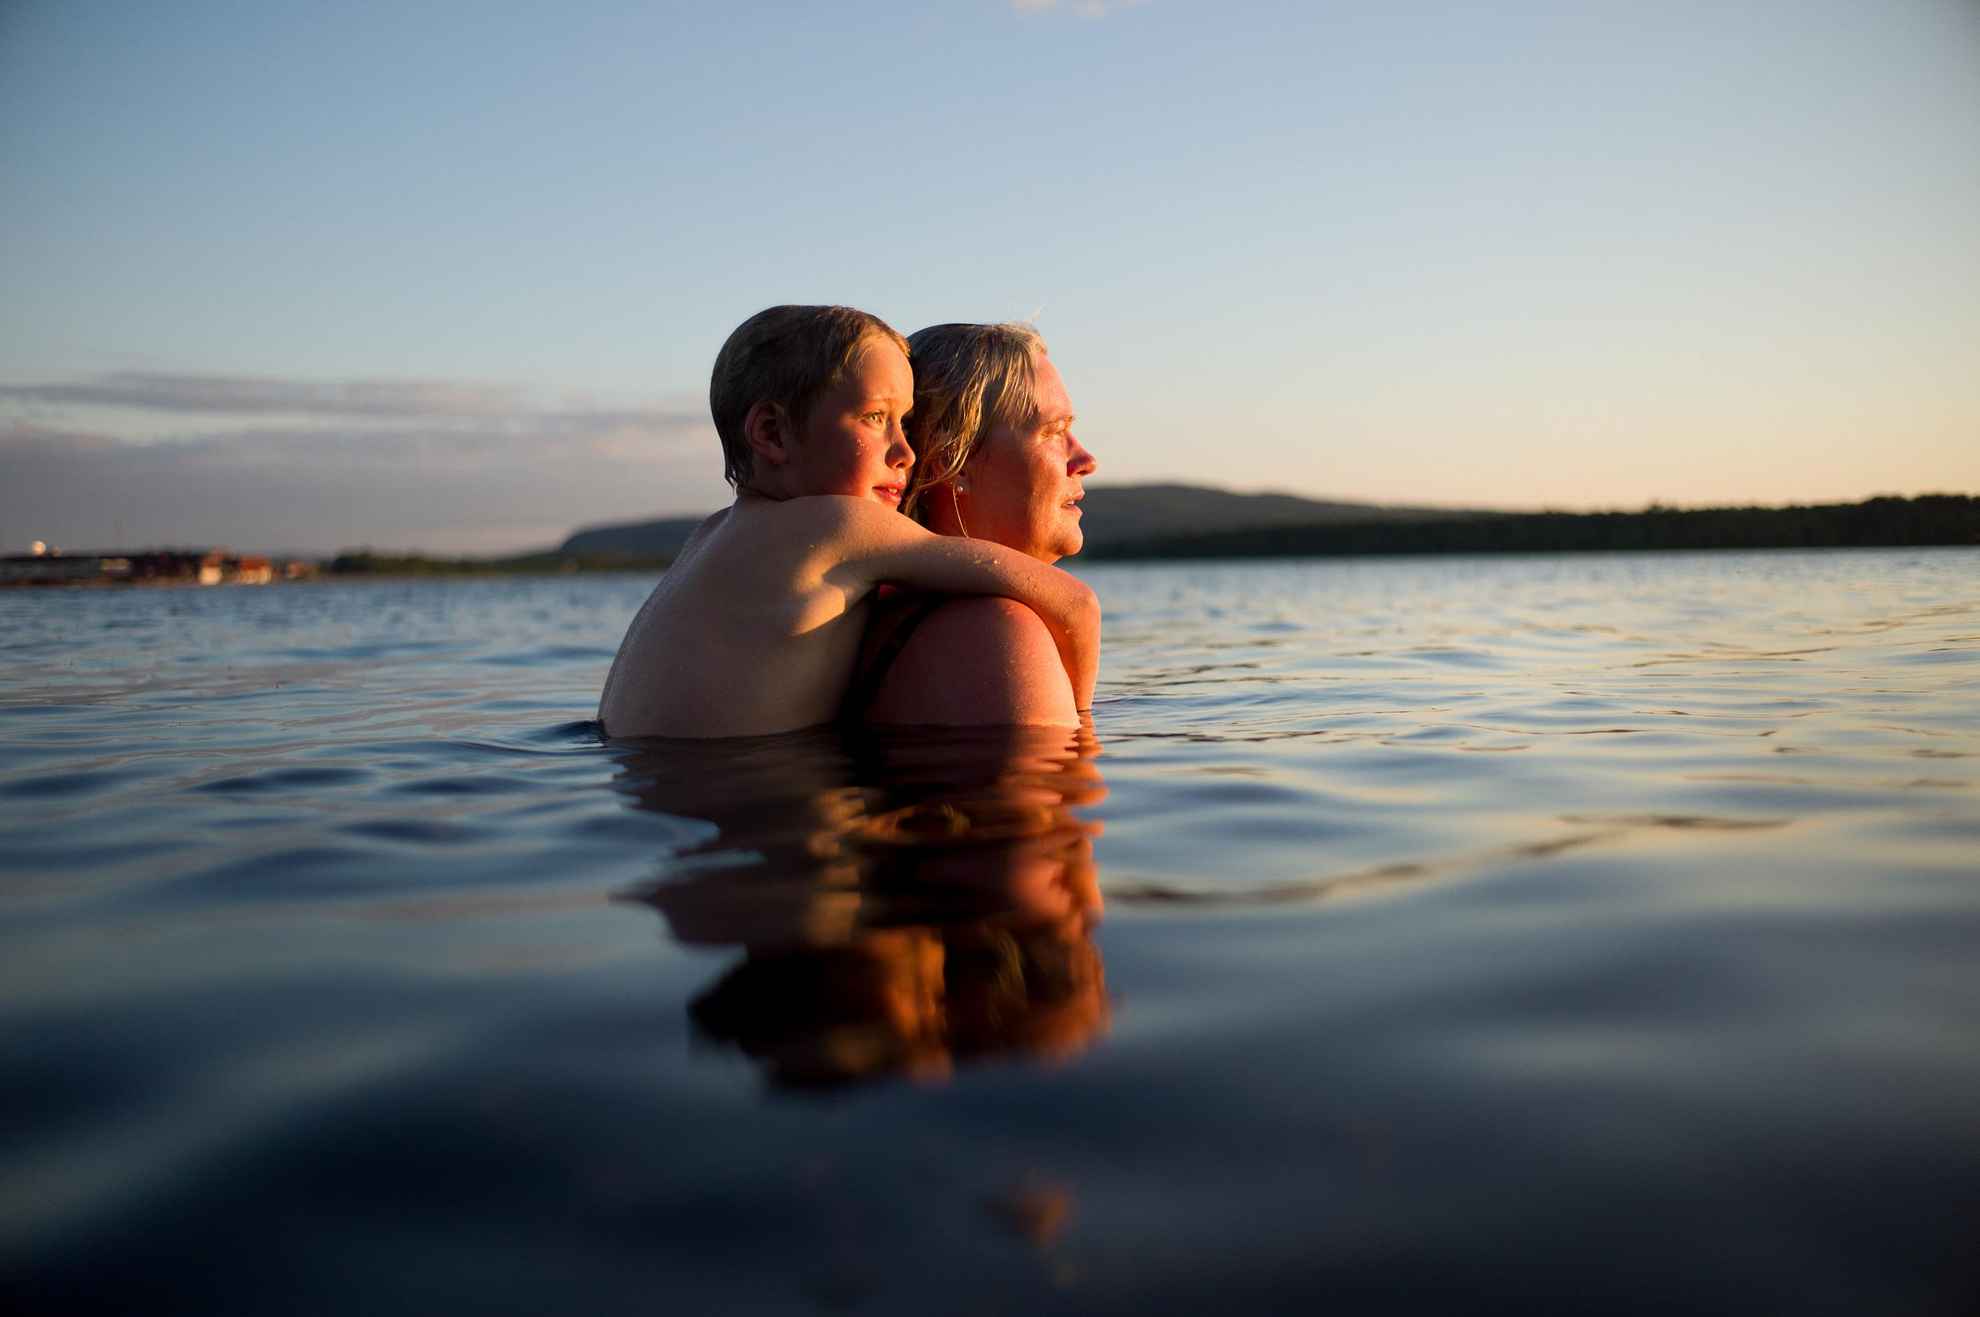 A woman and a child are in the water in a lake in Dalarna. The child is holding on to the woman's back.